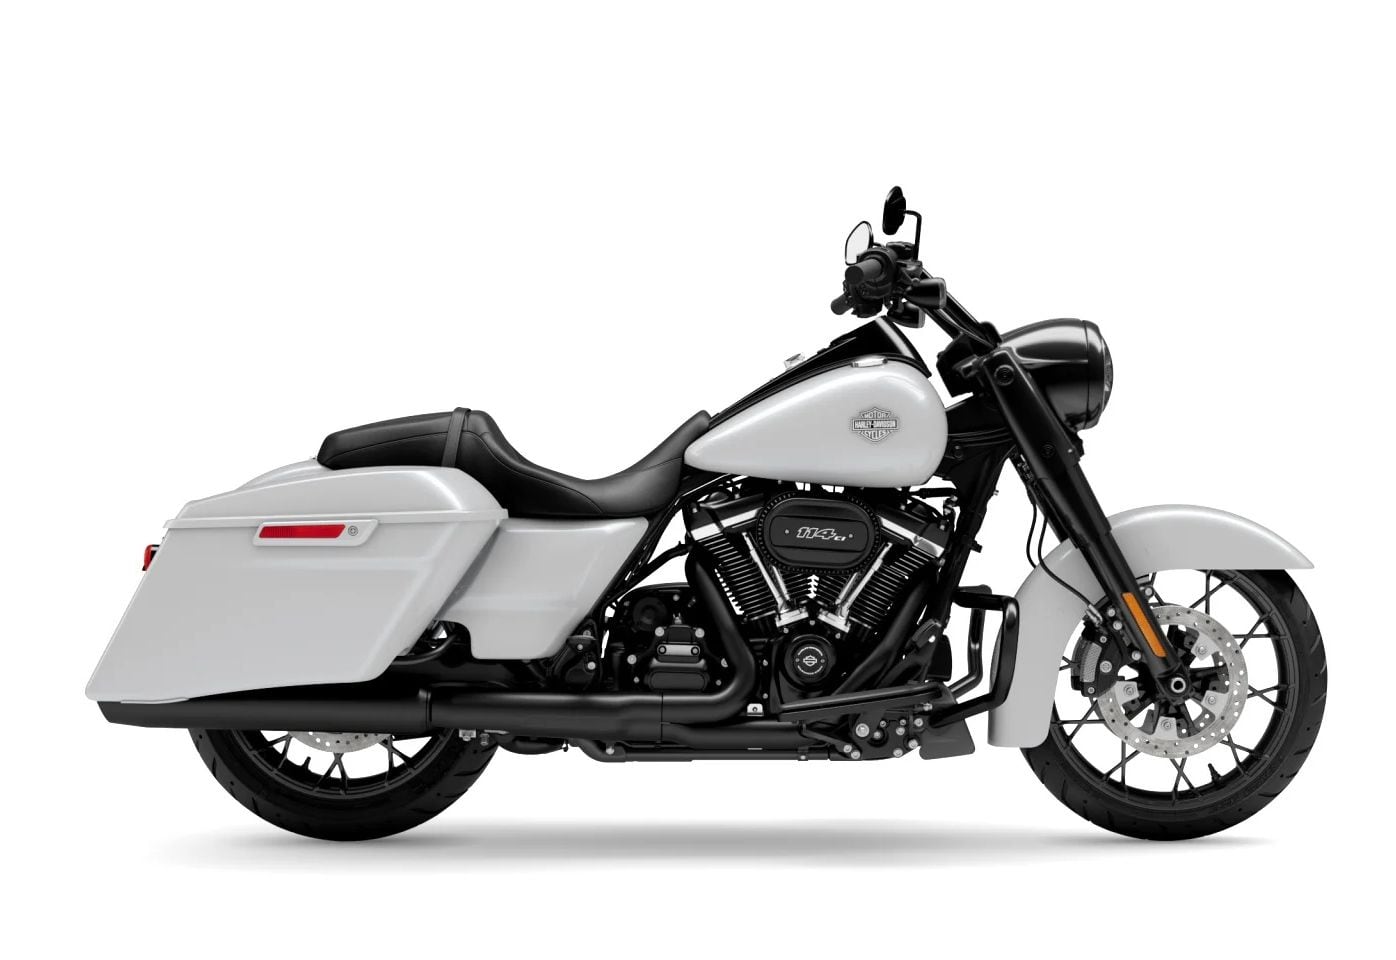 Stretched saddlebags, mini-ape handlebars, and floorboards all return on the 2024 Road King Special, which retails for $24,999 and comes in four color options.